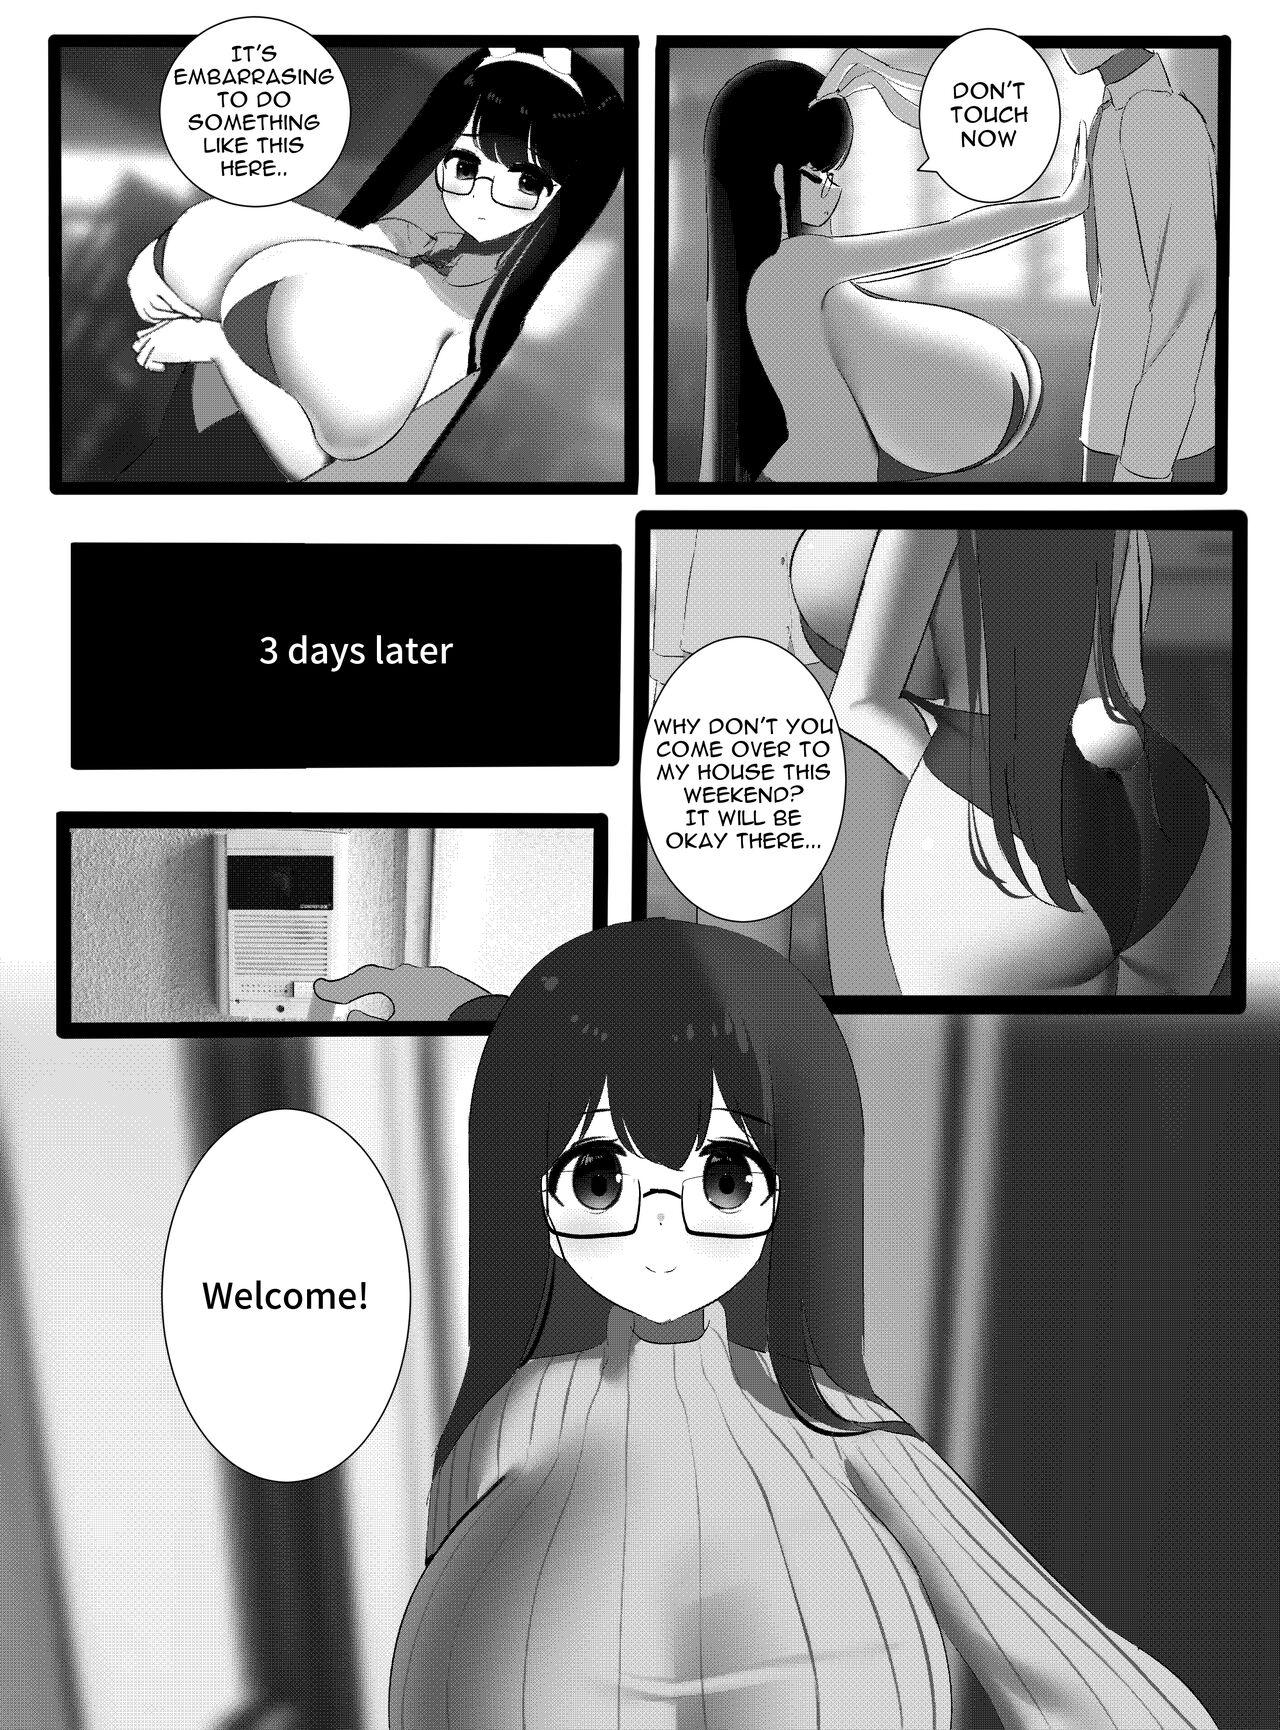 Extreme bunny suit - Original Sucking - Page 11